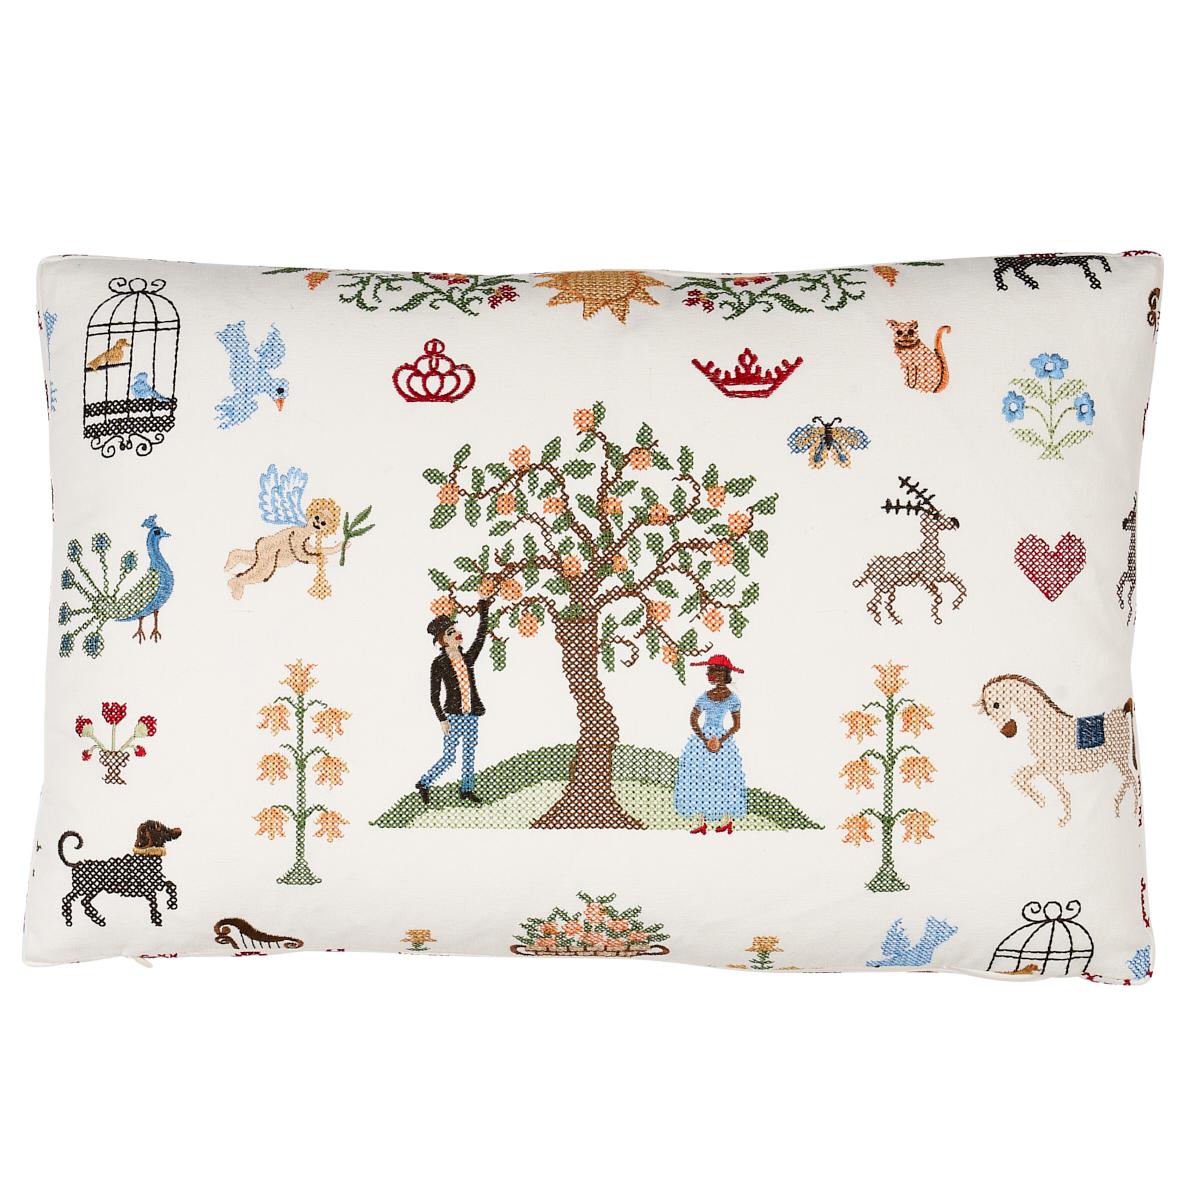 This pillow features Merrifield Sampler with a box edge finish. Based on hand-drawn art created in our studio and inspired by early American samplers, this embroidered design is animated by charming cross-stitched elements, from buildings and